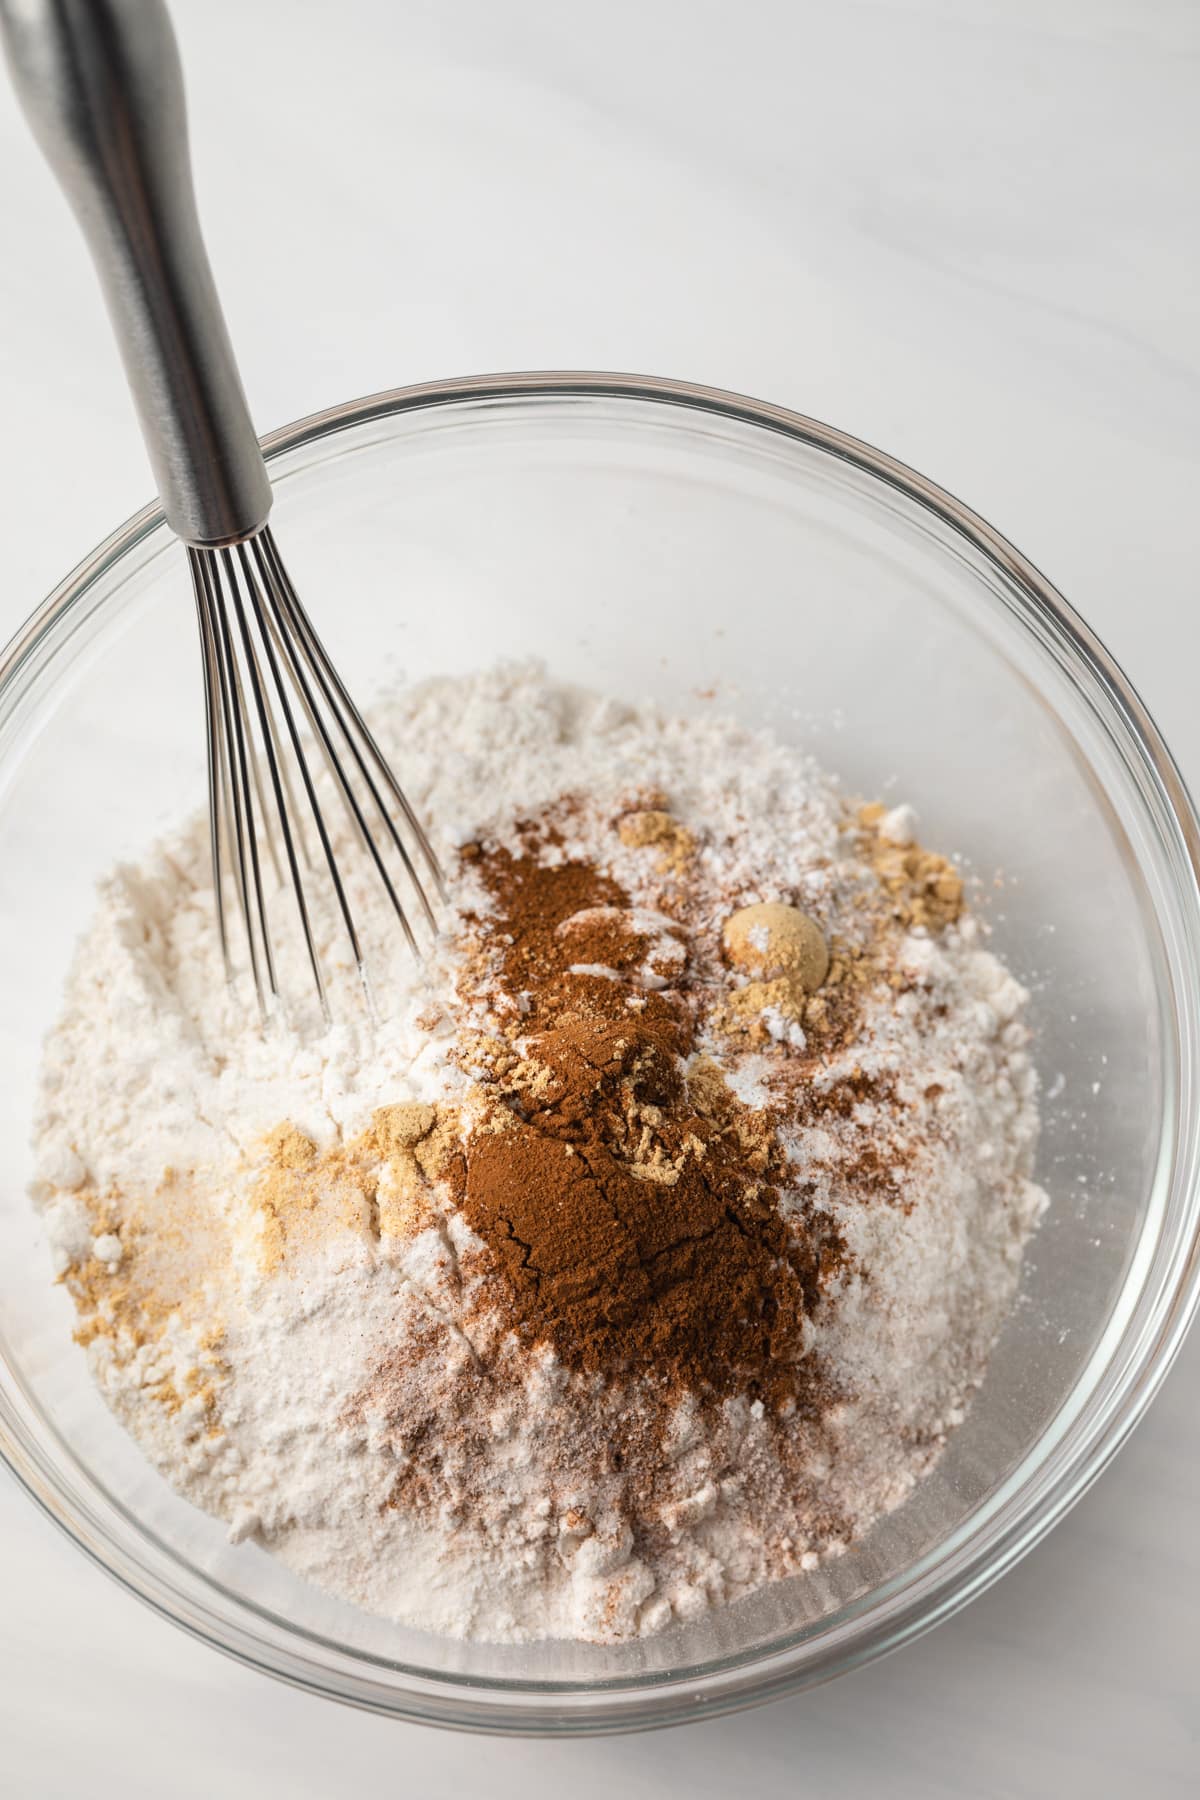 Dry ingredients mixed in a glass bowl.